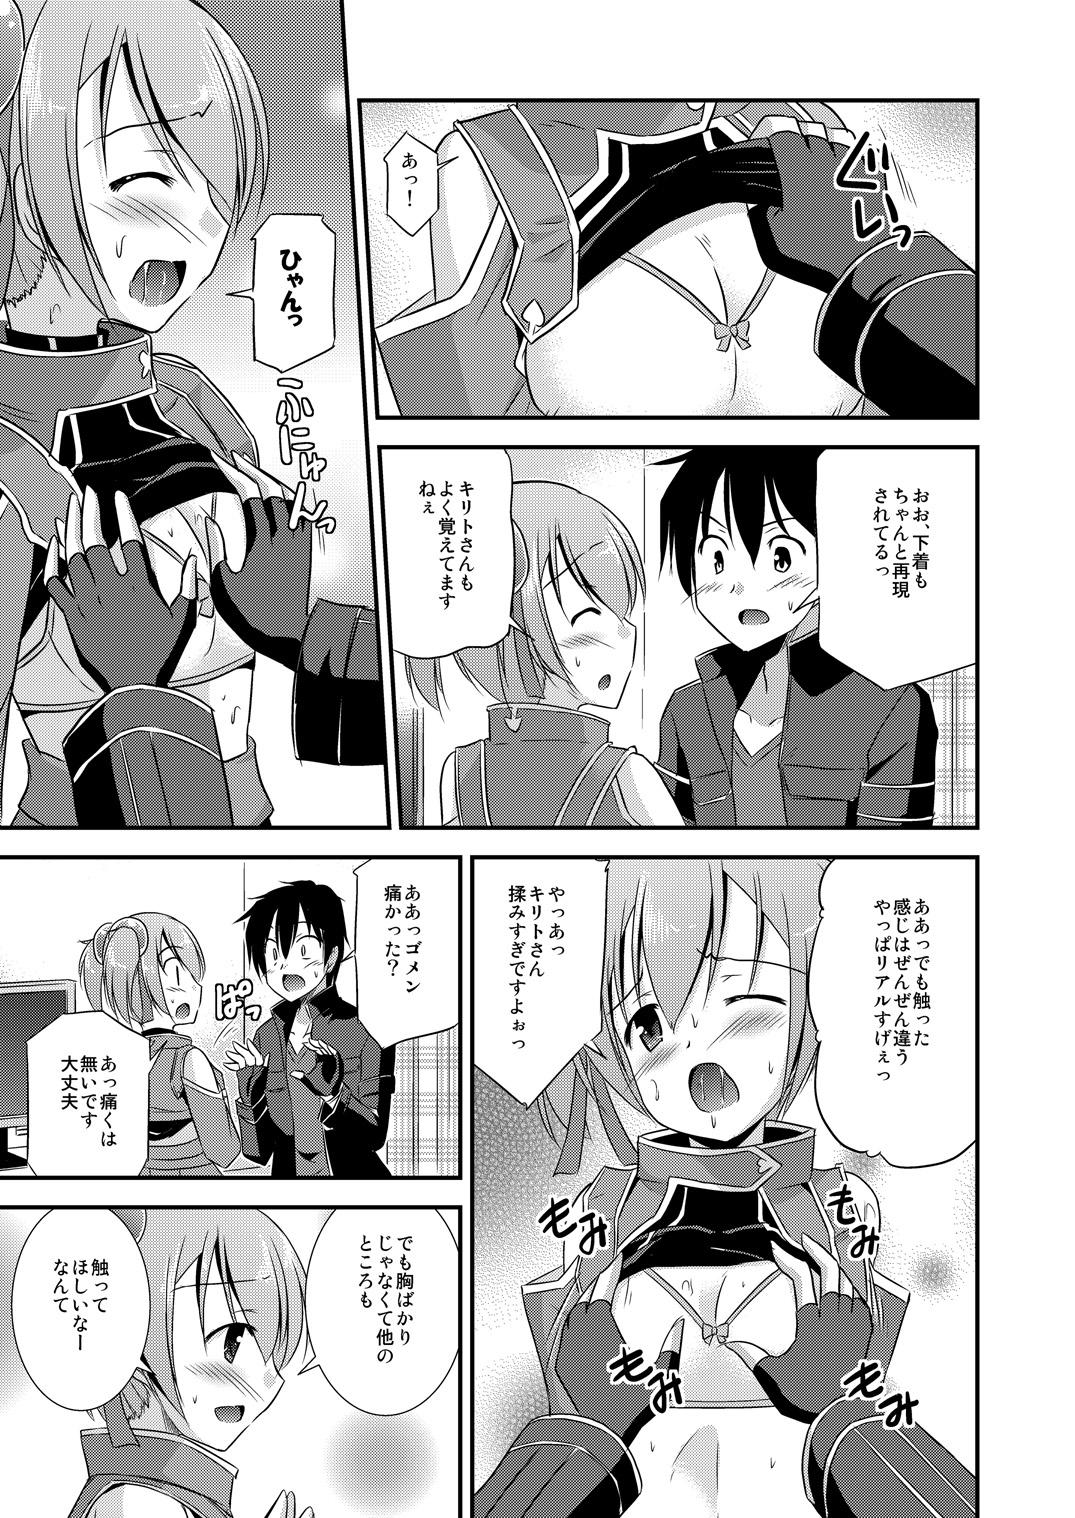 The Silica Route Offline Phantom Parade After - Sword art online Stockings - Page 10